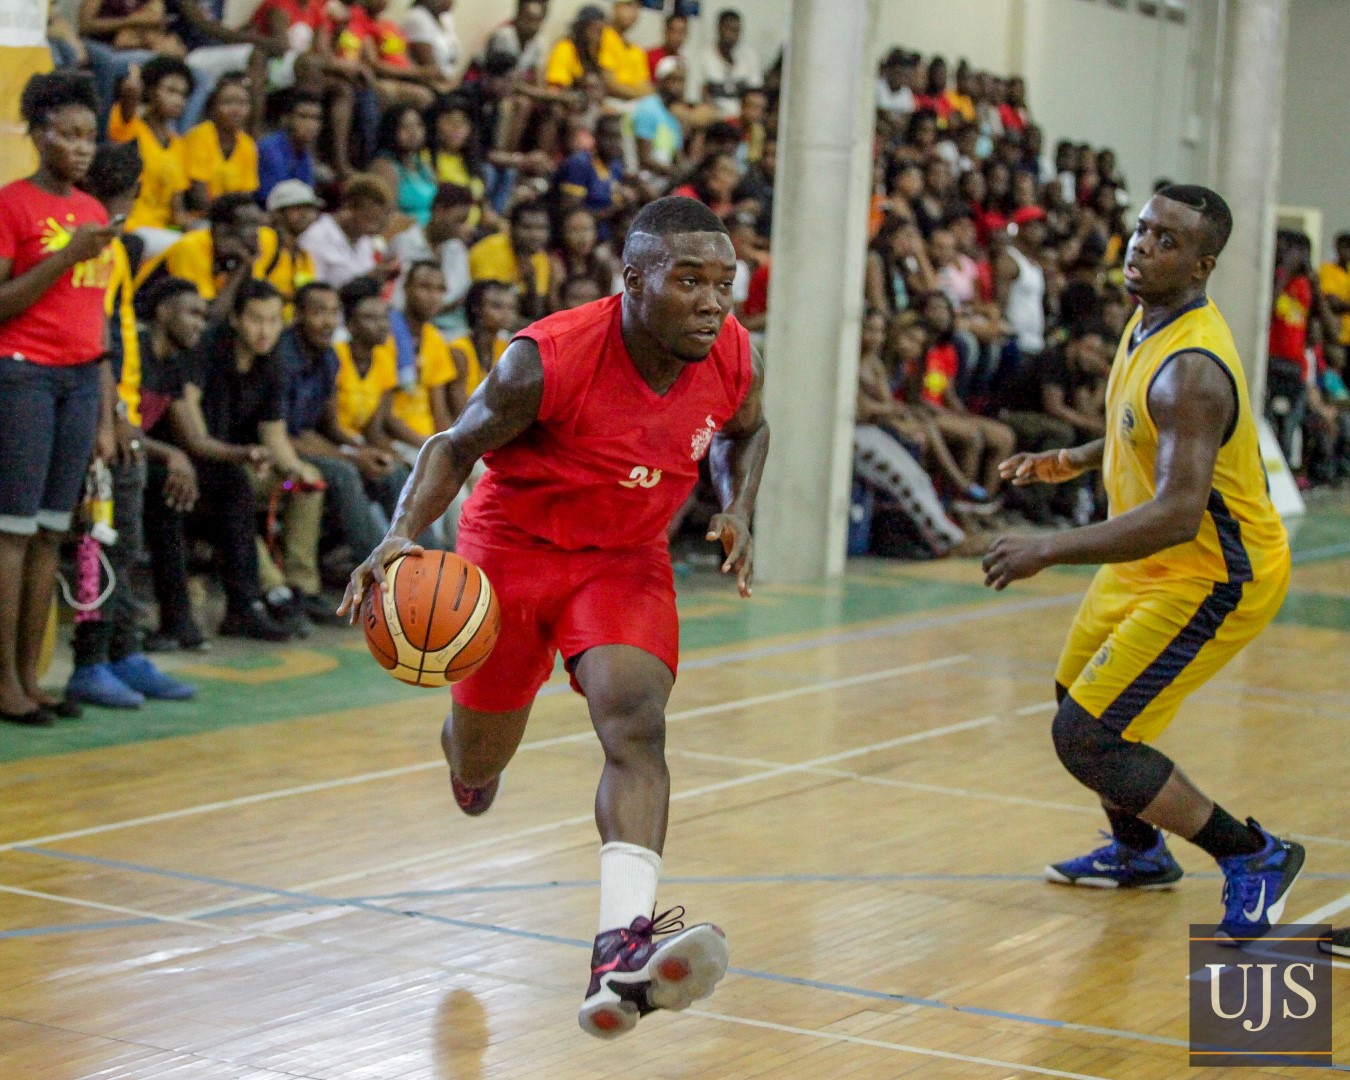 The University of the West Indies Male basketball team up the ante in the final quarter of the match defeating their Old Hope Road rivals by 5 points to claim victory at the UWI/UTech Games